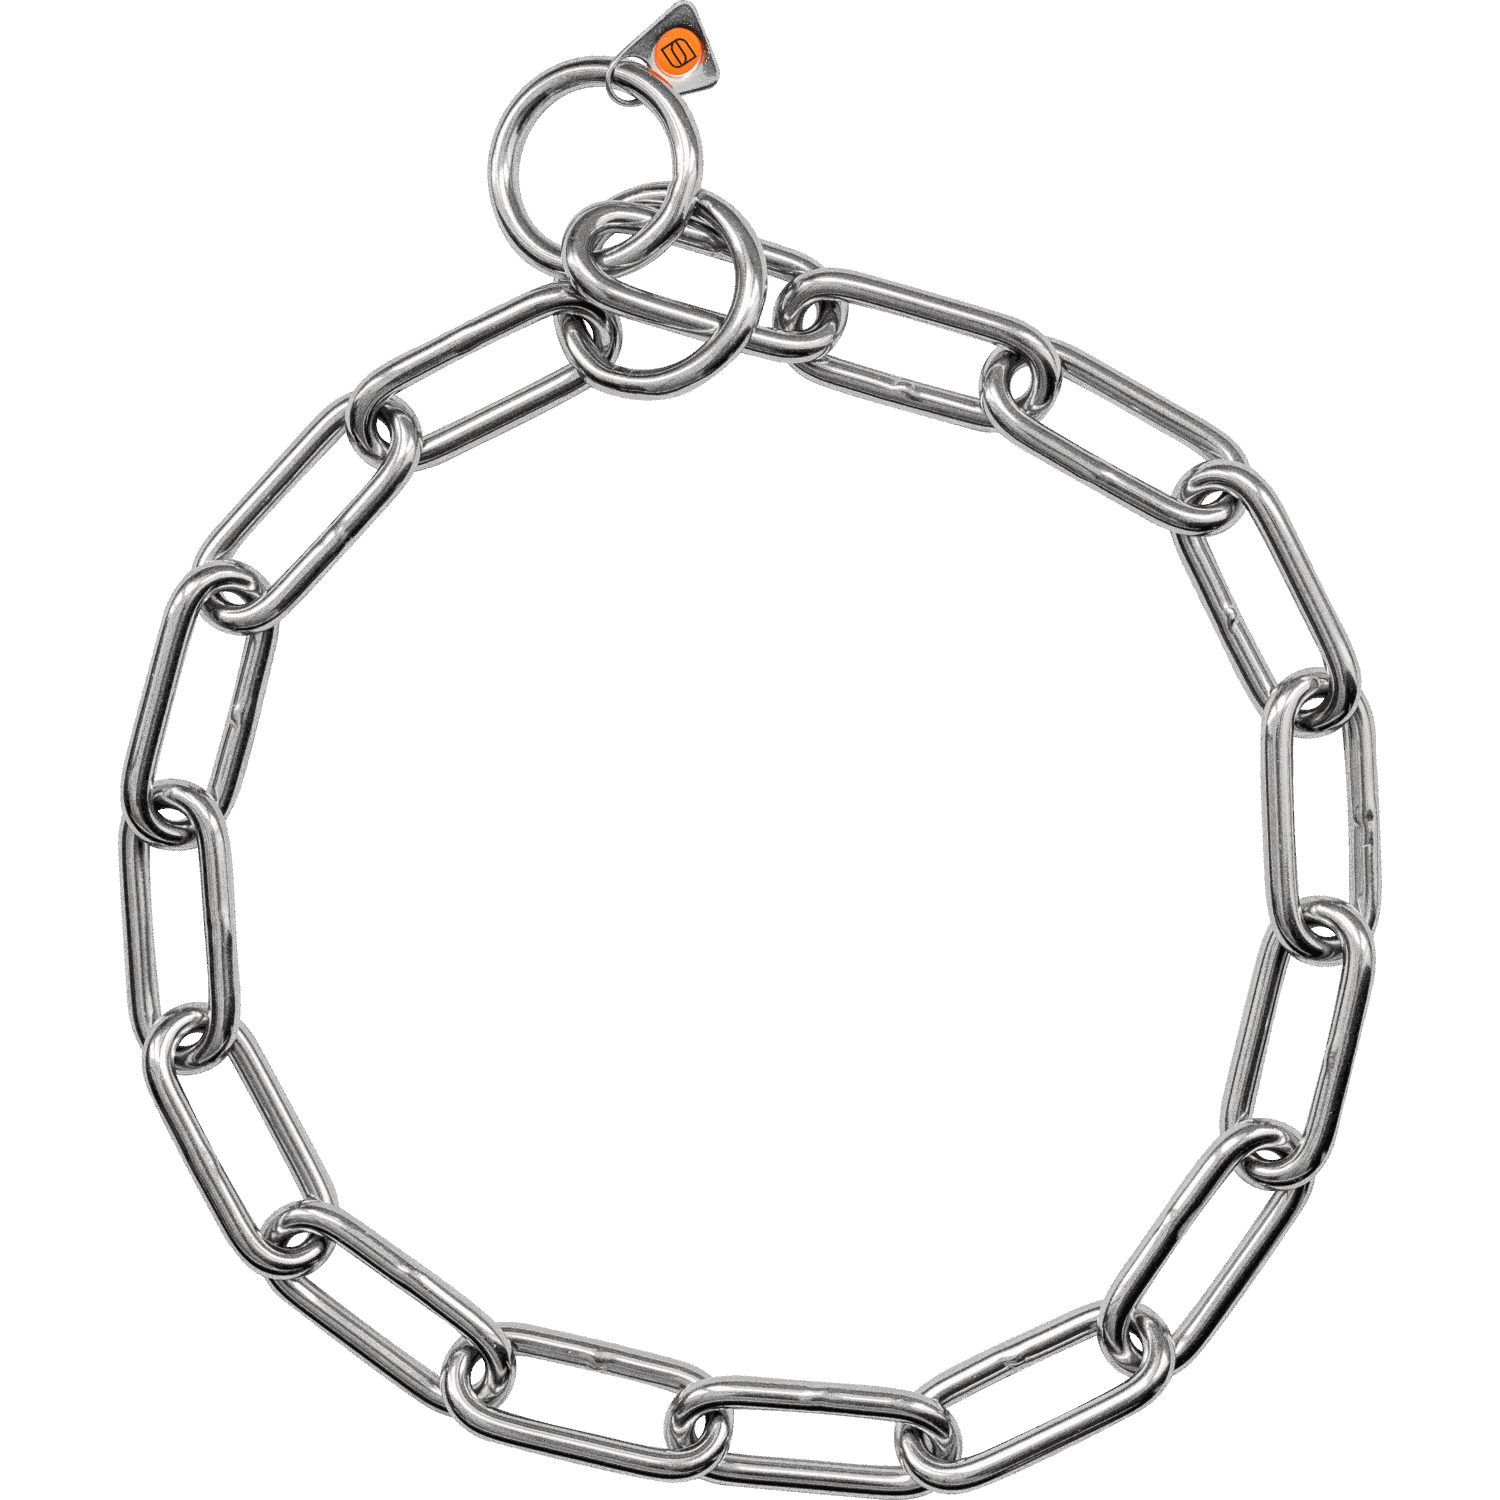 Extra Strong Long Chain Link Collar - 5mm